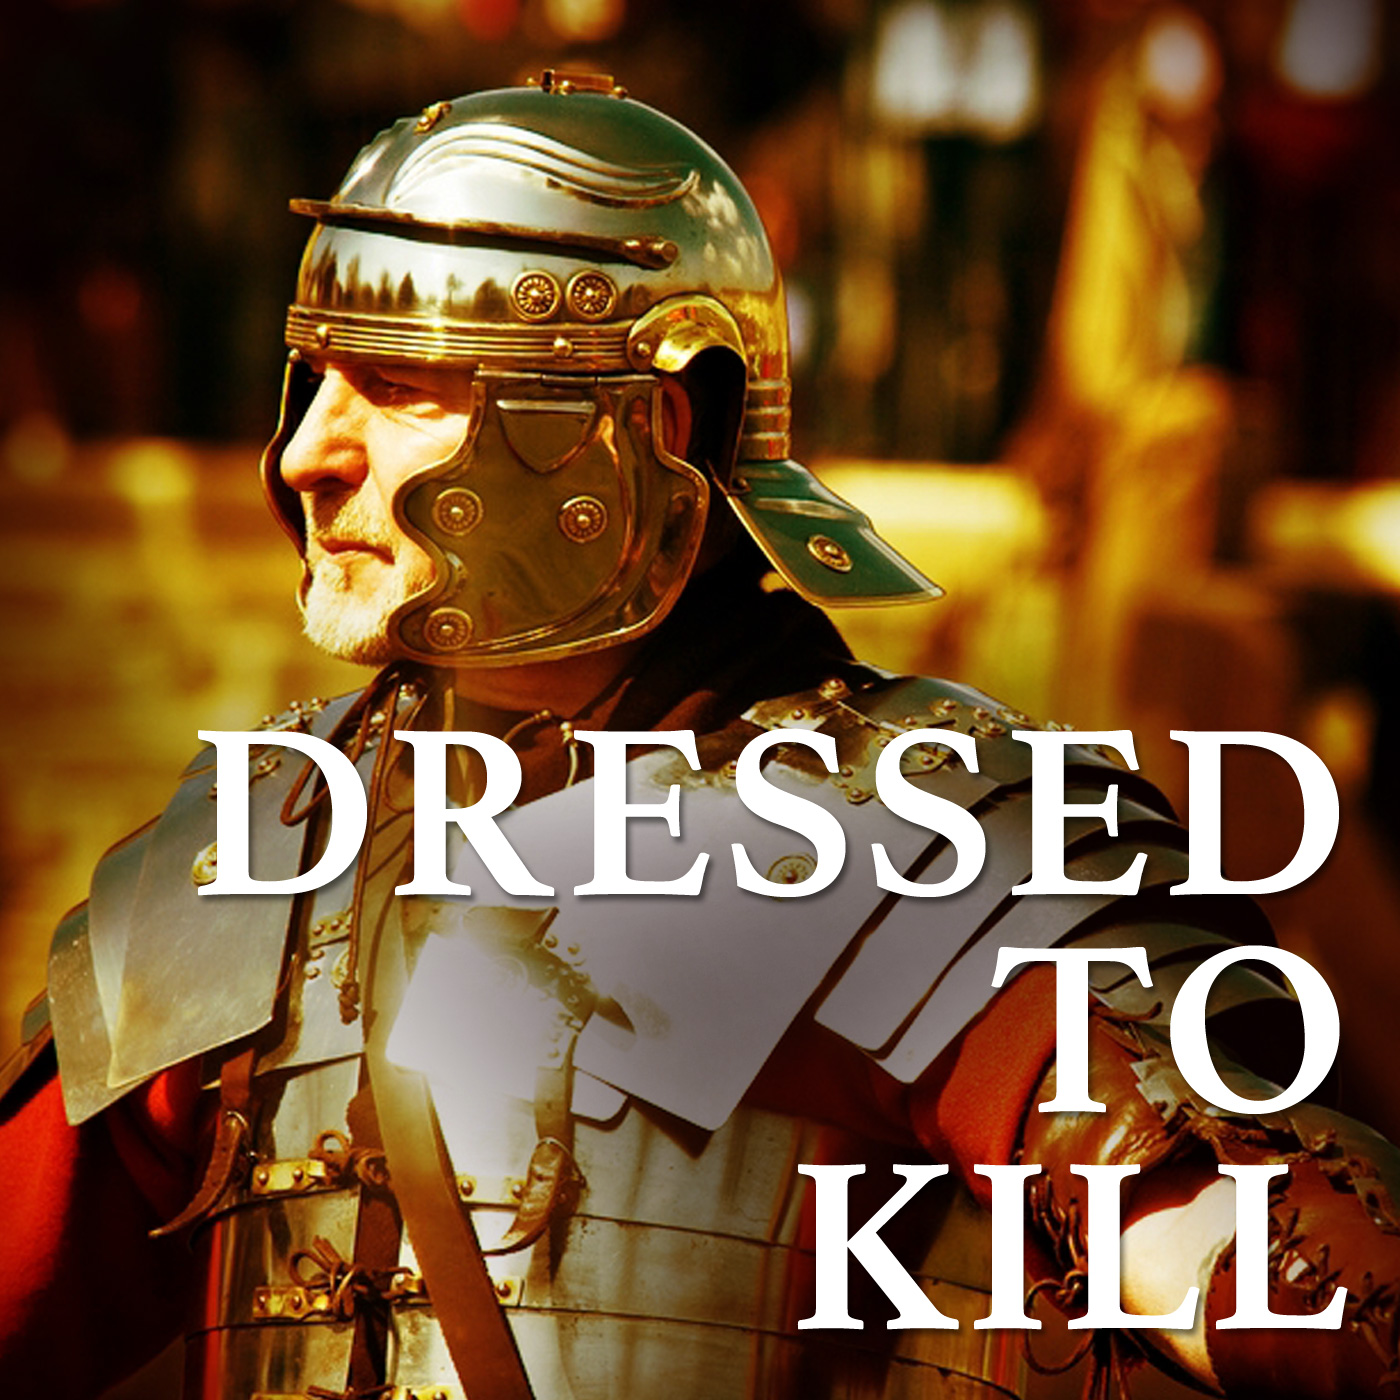 Dressed to Kill: The Sword of the Spirit